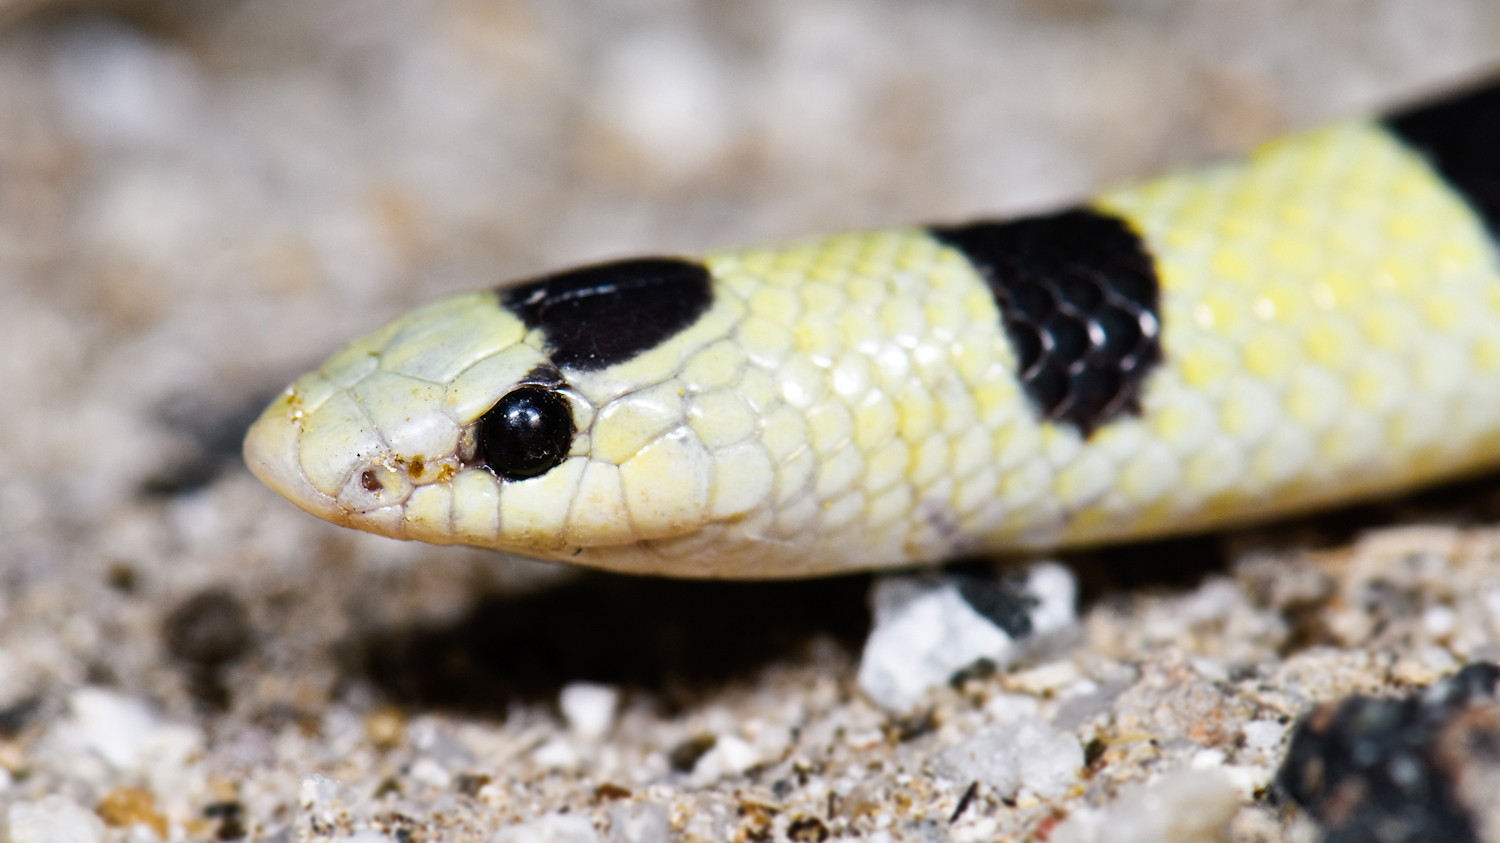 Shovel-nosed snake. Photo © Marshal Hedin / Flickr through a Creative Commons license